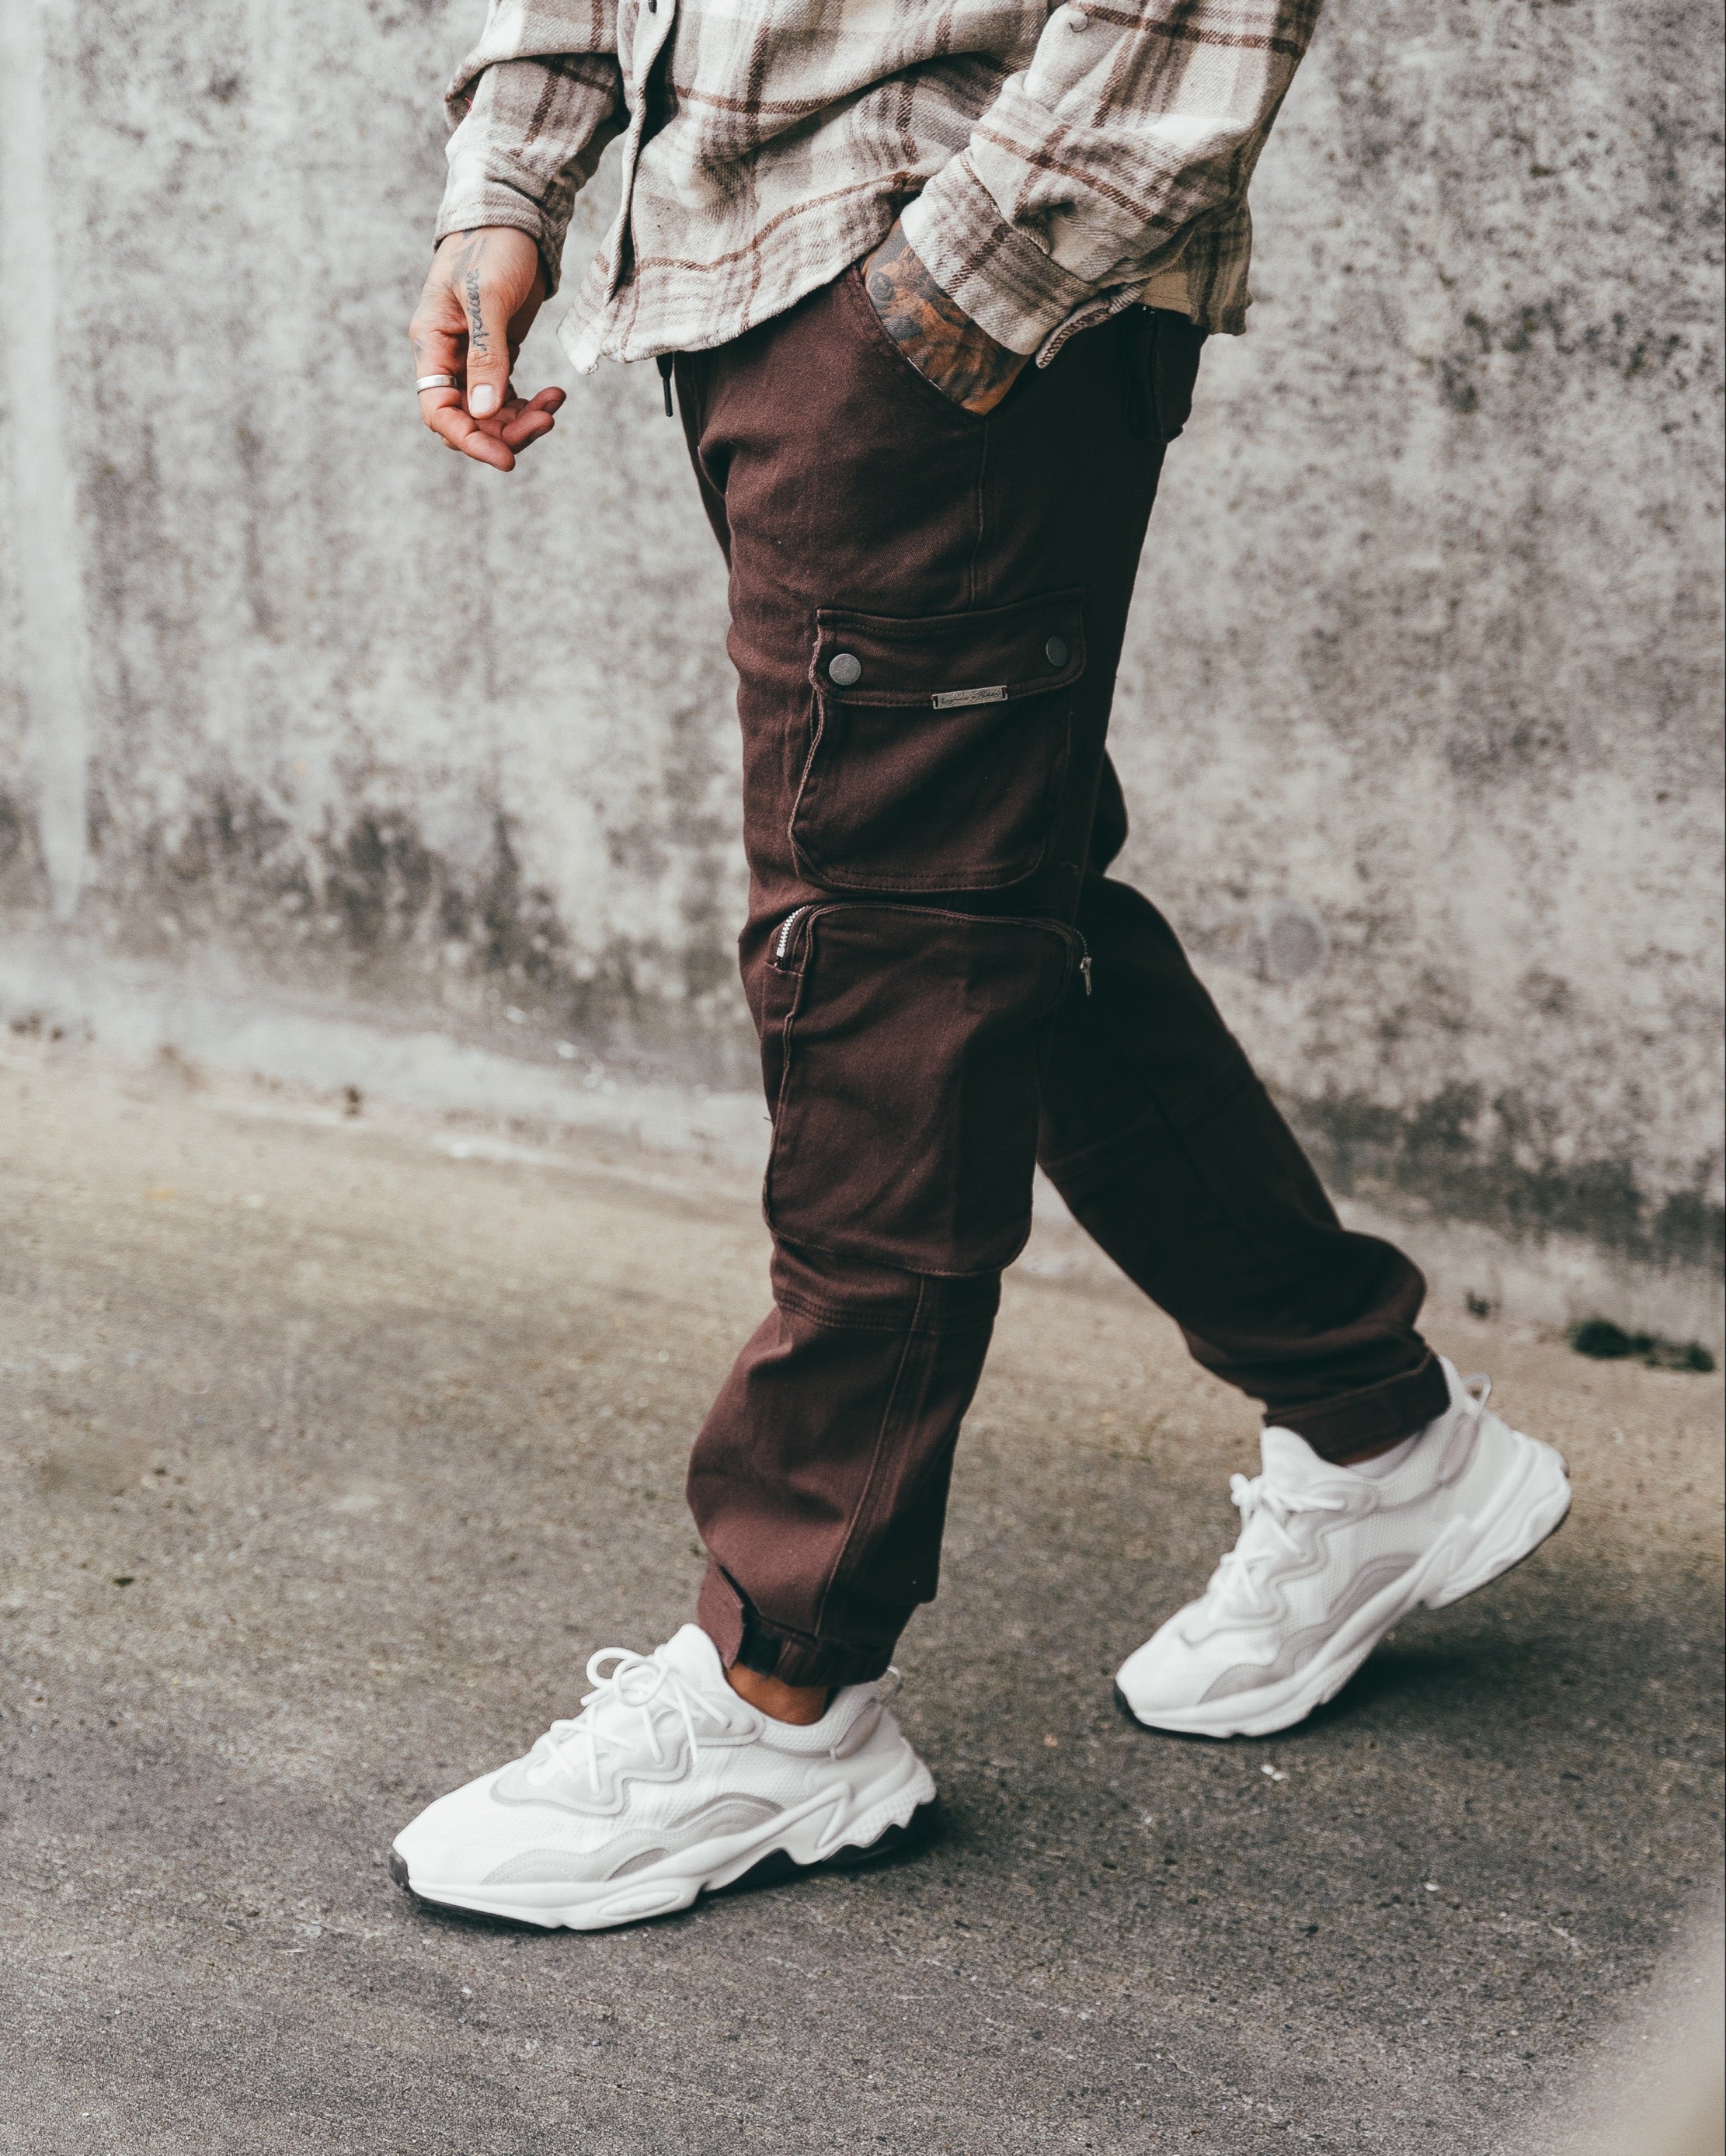 Relaxed Fit Utility Cargo Pants In Chocolate Brown